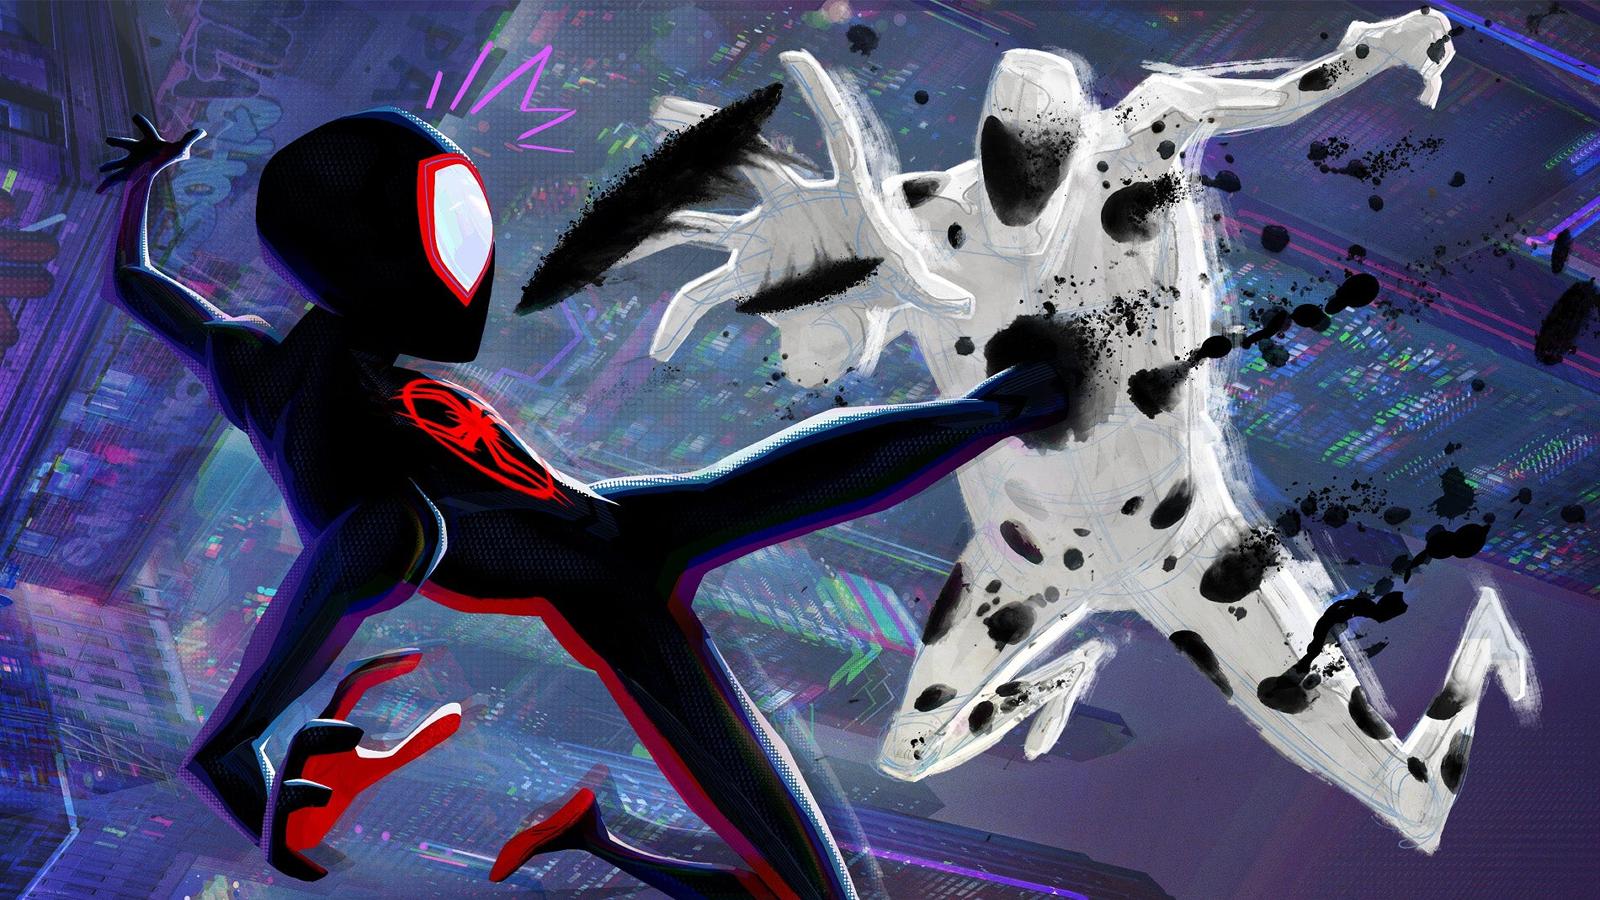 Miles Morales fights The Spot in Spider-Man: Across the Spider-Verse.